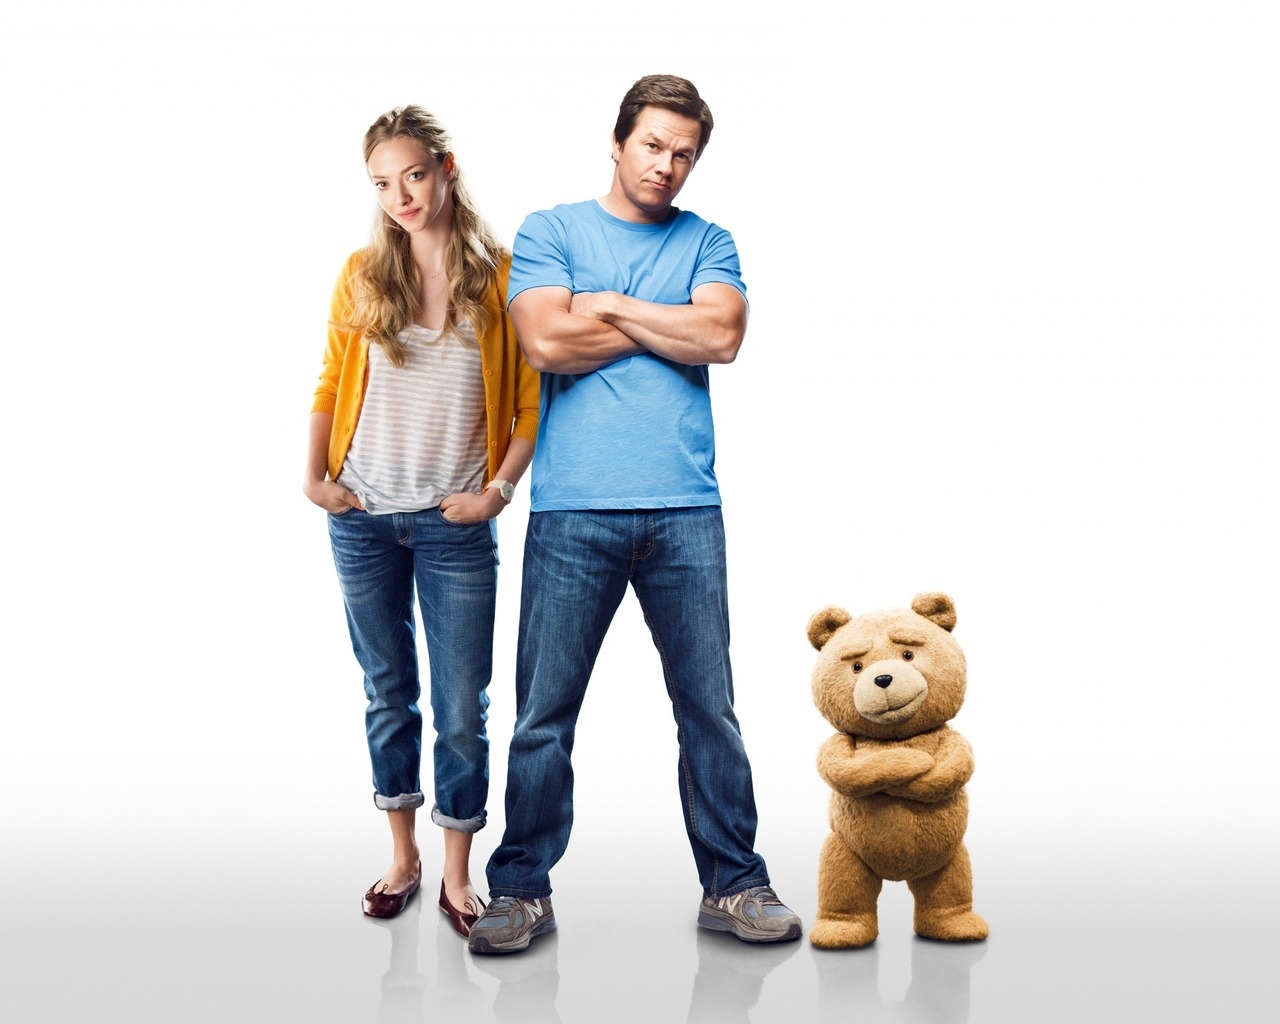 Ted 2 for 1280 x 1024 resolution